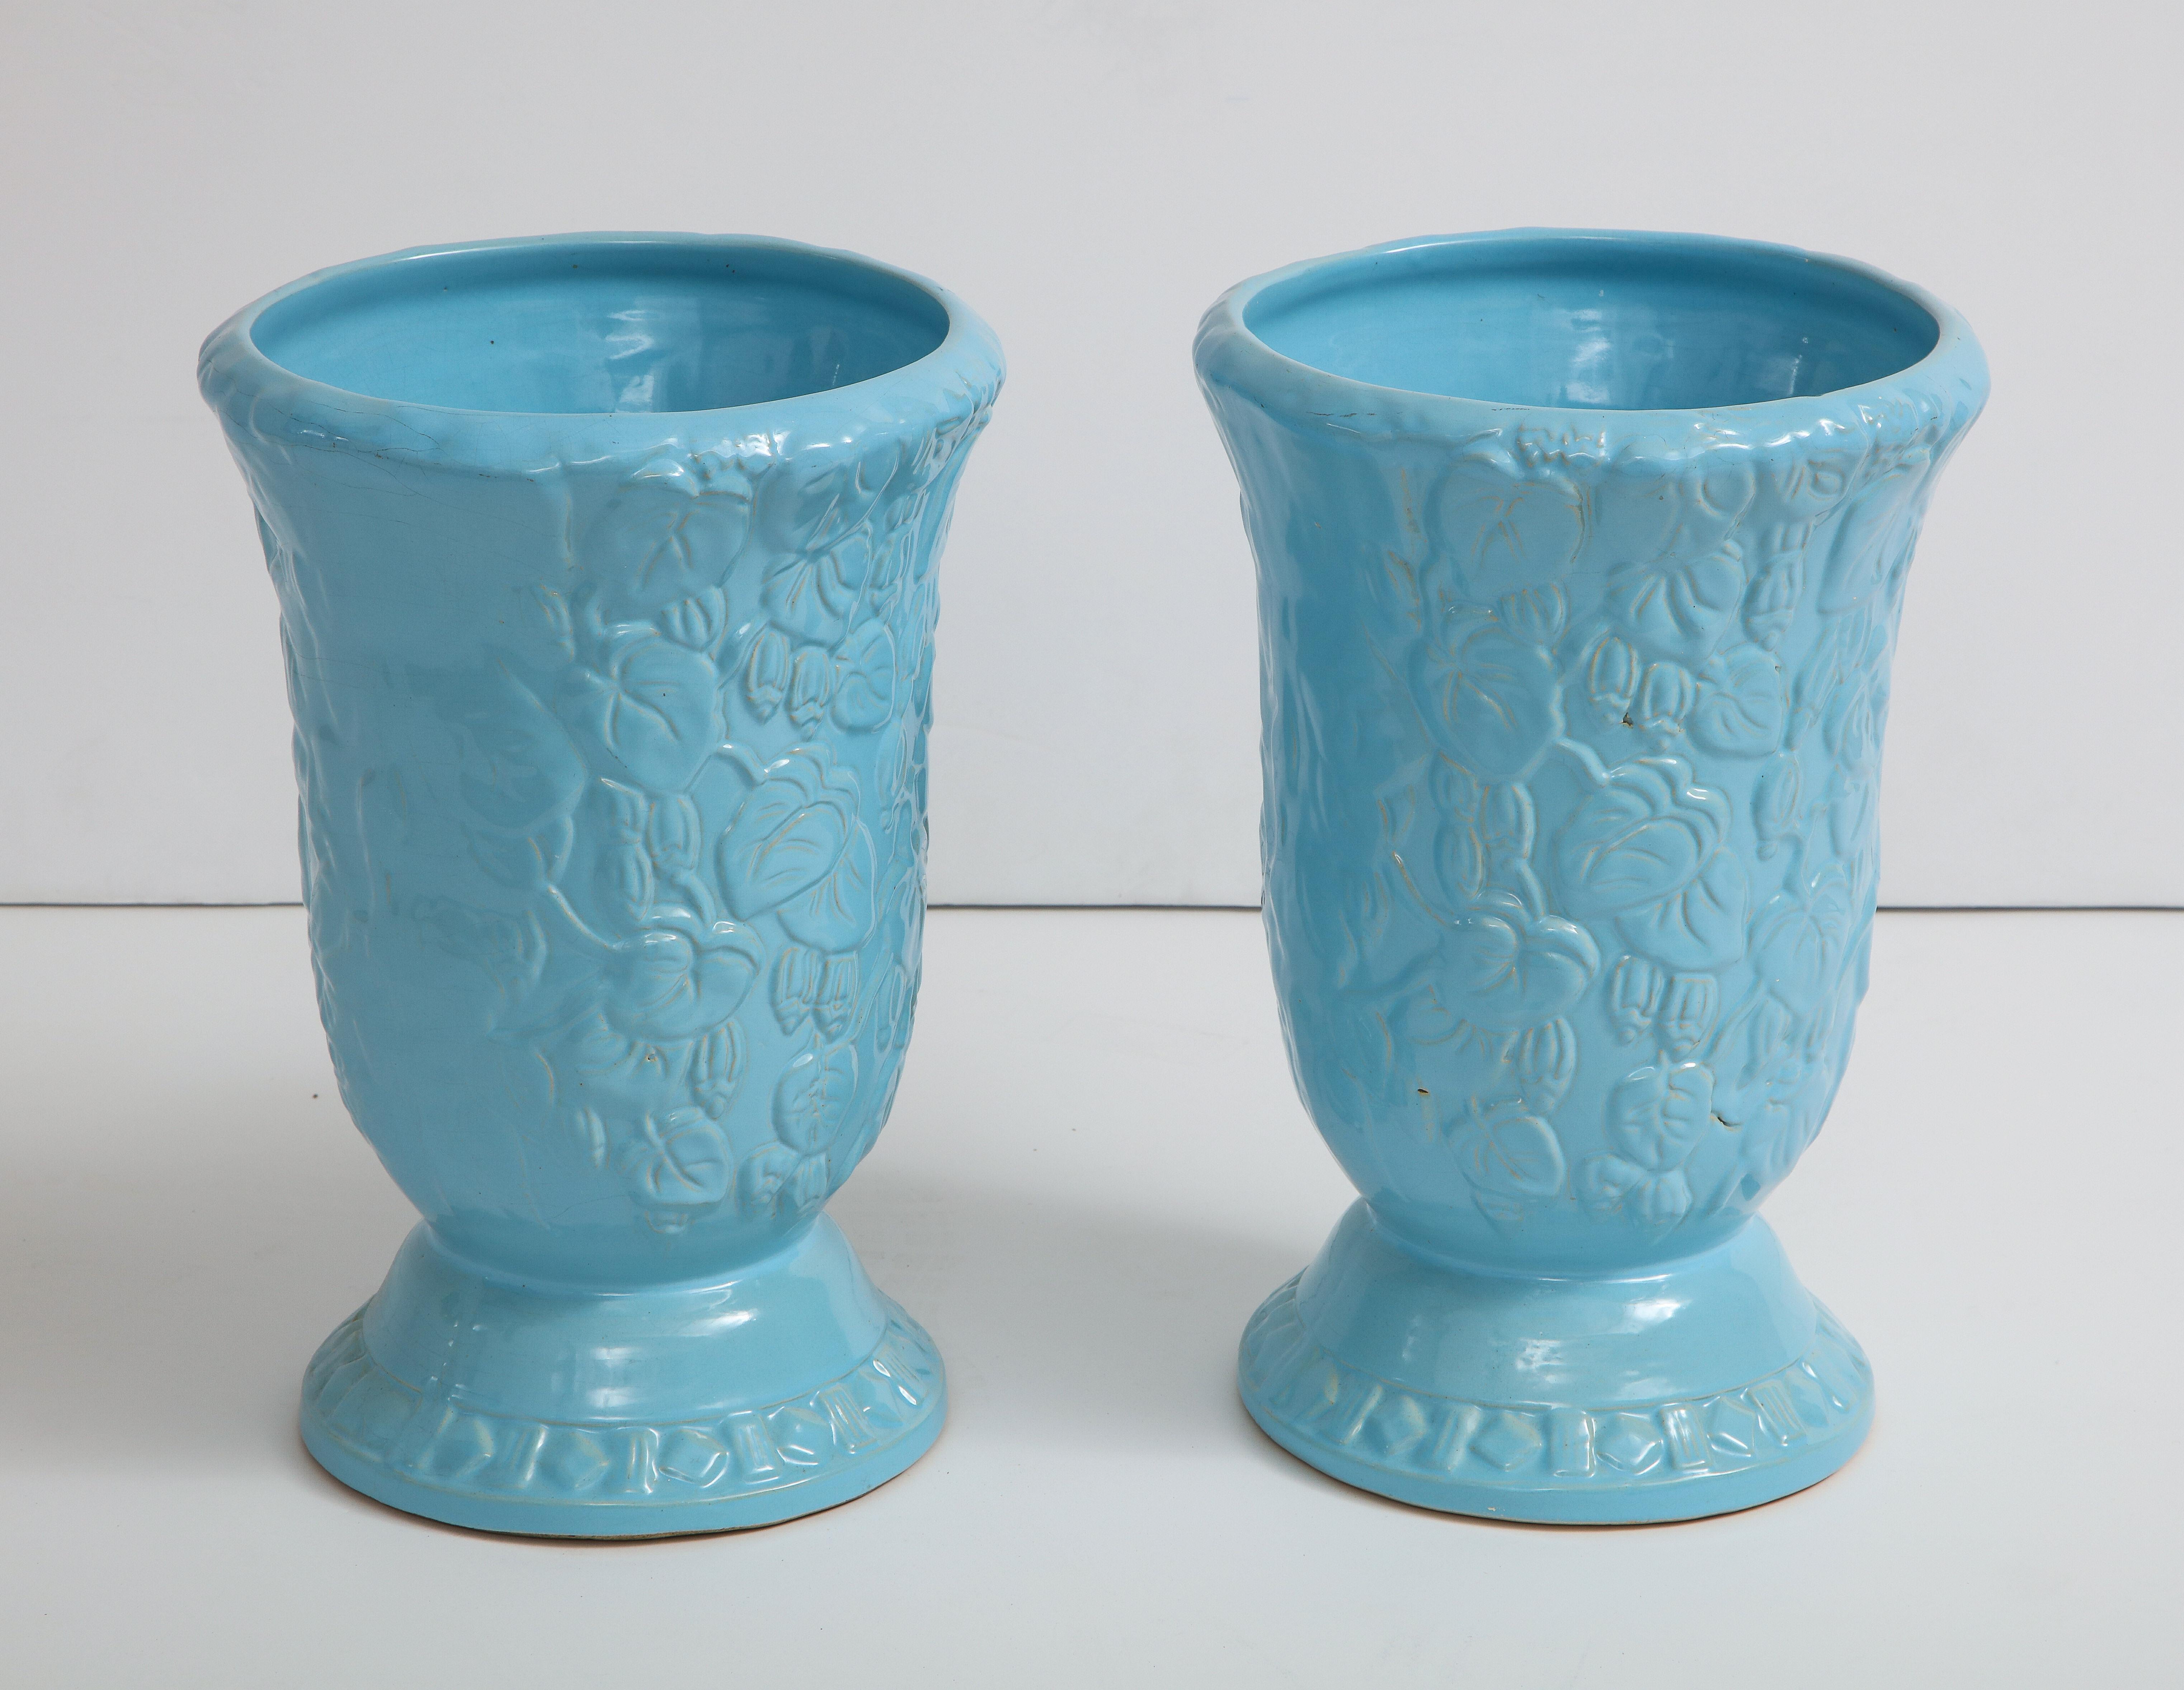 Exquisite pair of large scale cache pots featuring an all-over leaf and vine raised pattern and a refreshing sky blue glaze. New old stock, Roseville, circa 1930s.